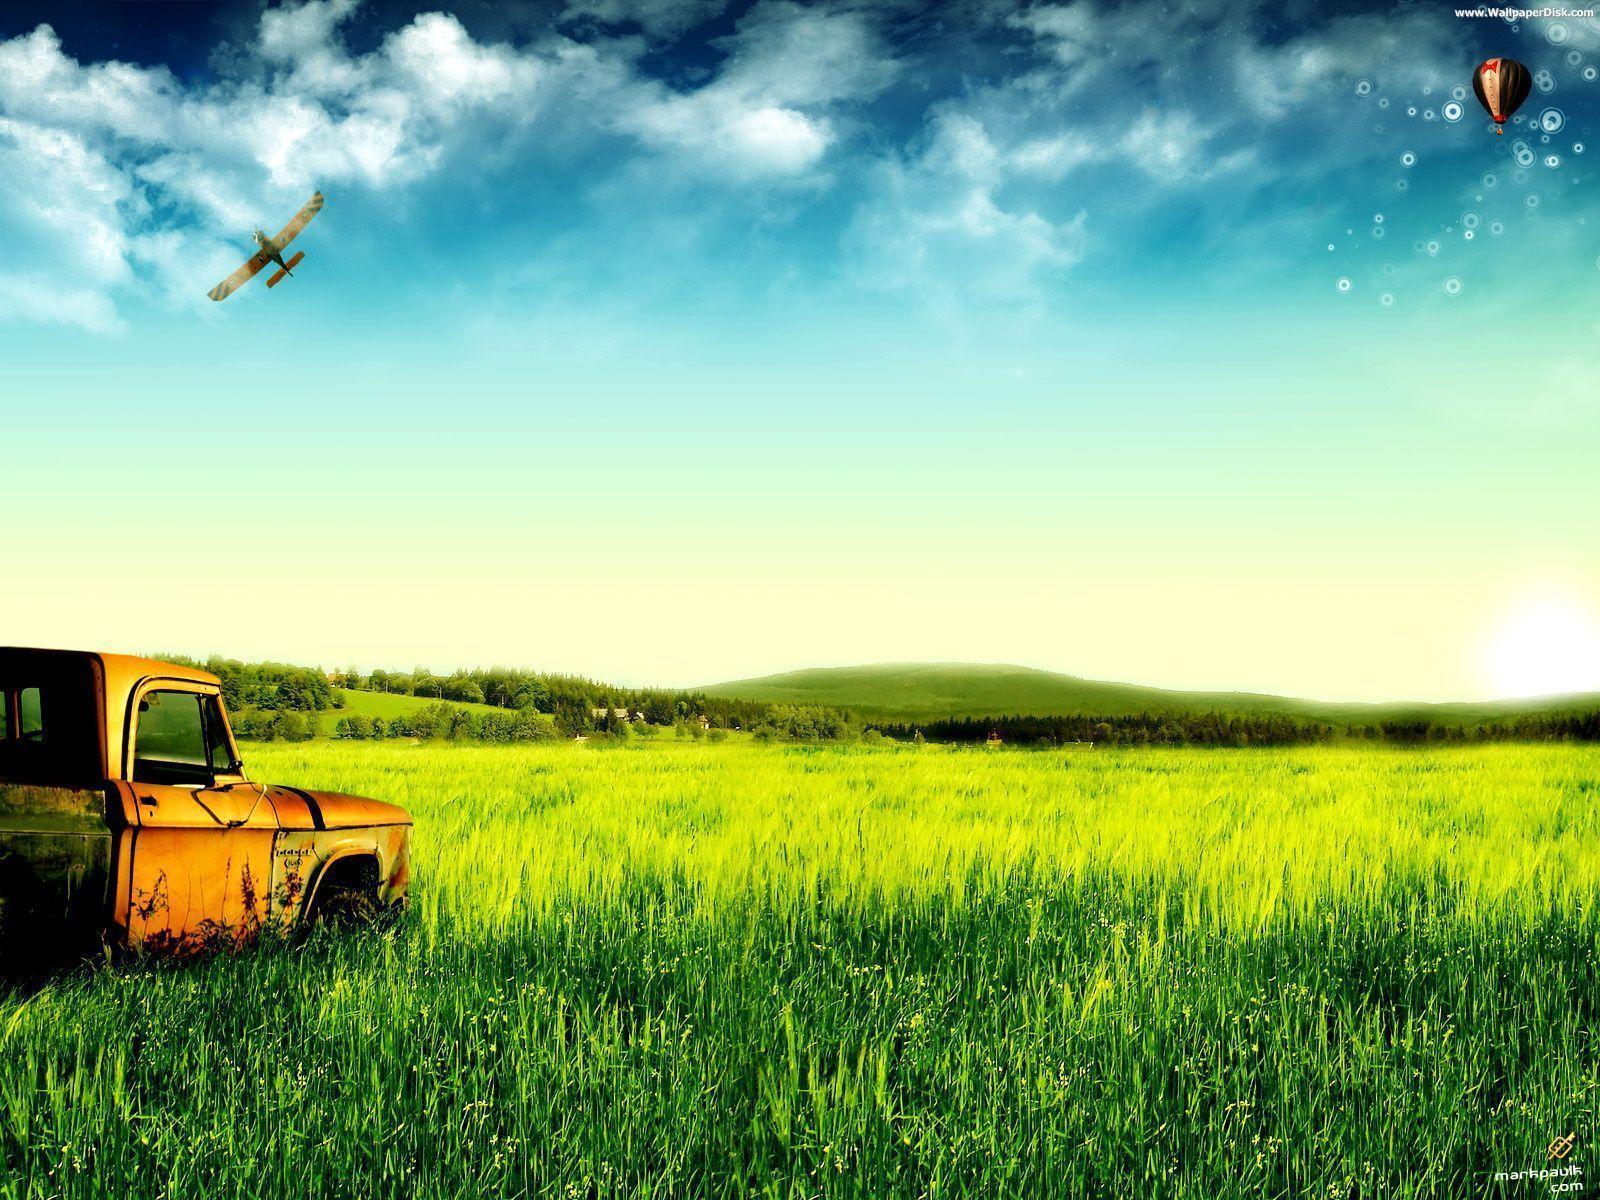 Pickup Truck Wallpaper. Daily inspiration art photo, picture